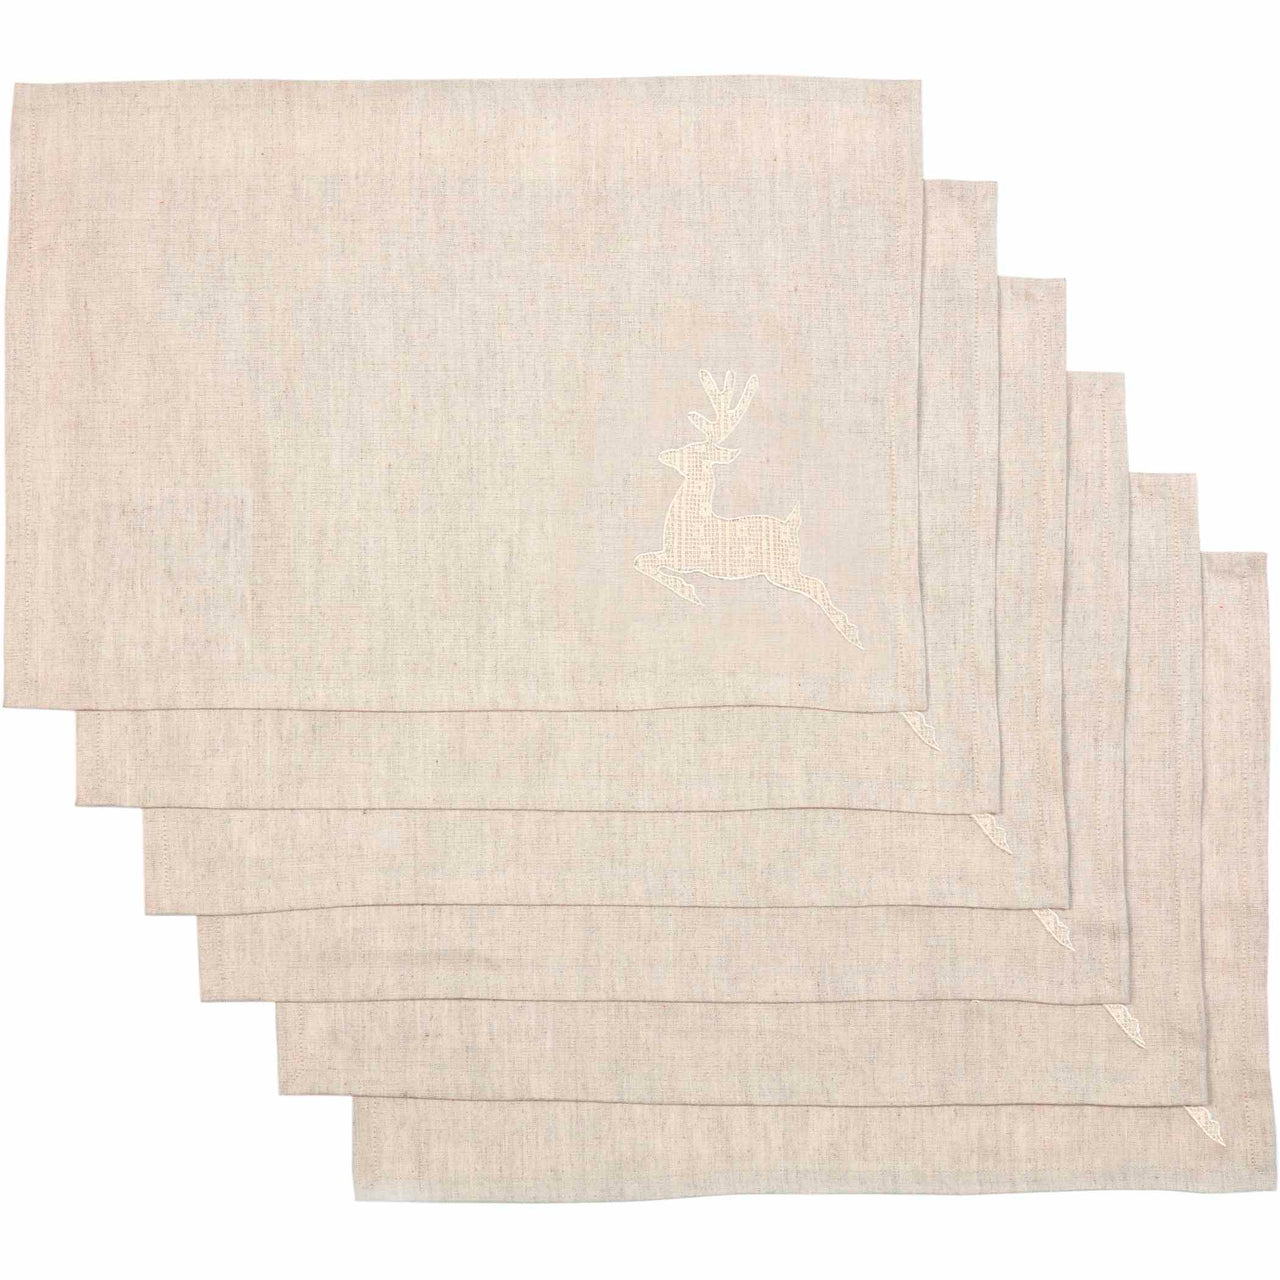 Creme Lace Deer Placemat Set of 6 12x18 VHC Brands